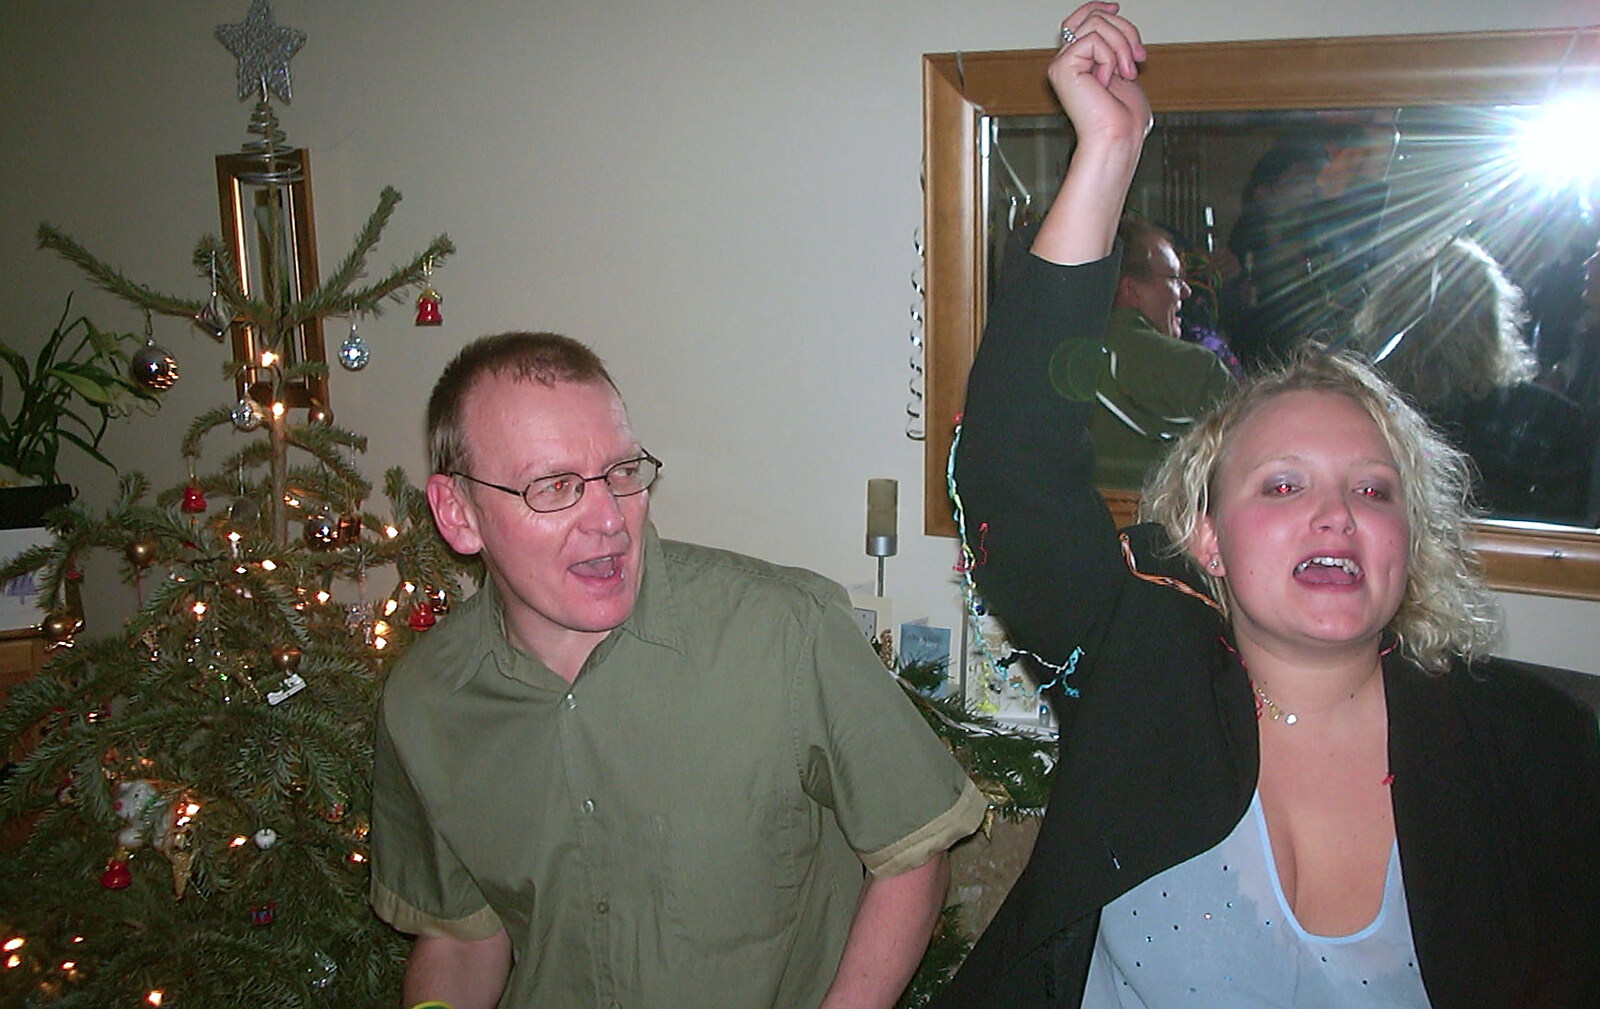 It's already kicked off in the lounge from A 3G Lab New Year at Michelle's, St Ives, Cambridgeshire - 31st December 2001